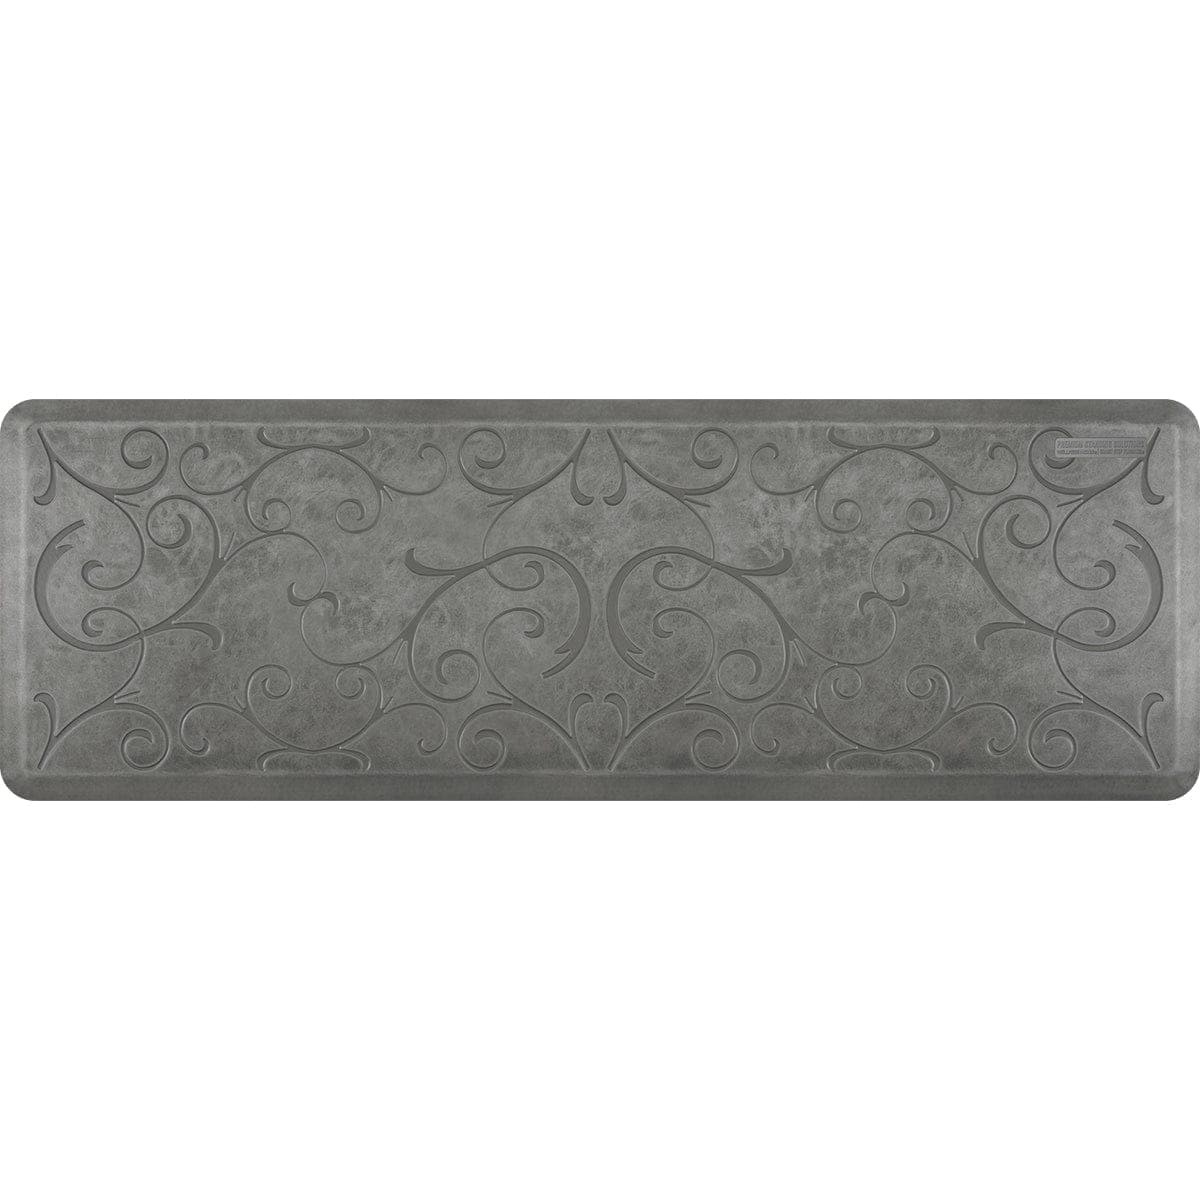 WellnessMats All WellnessMats WellnessMats Bella Collection - Silver Leaf